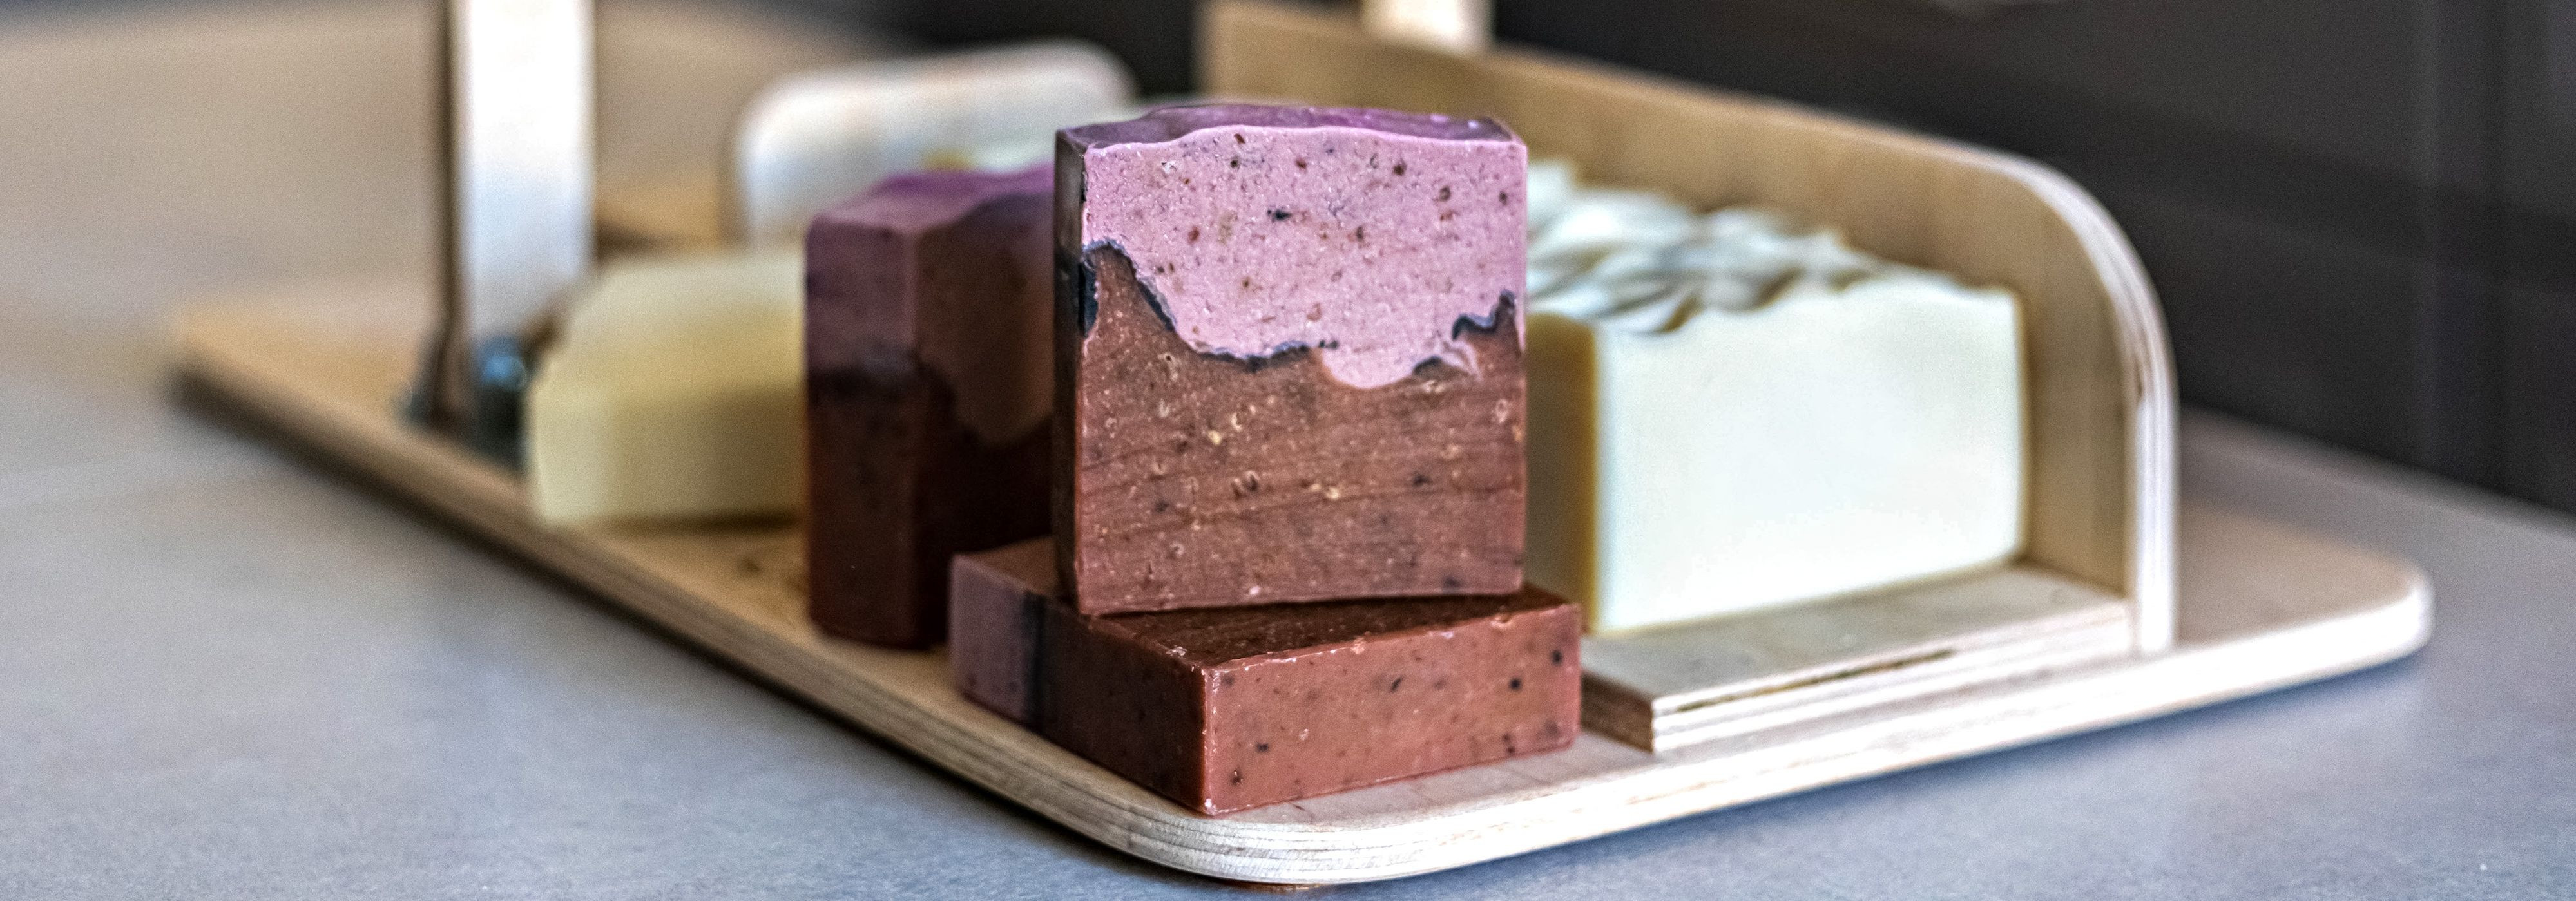 Handmade soaps are a luxurious alternative to commercial soaps. Crafted with care and attention to detail, each bar is a work of art, imbued with the personalit